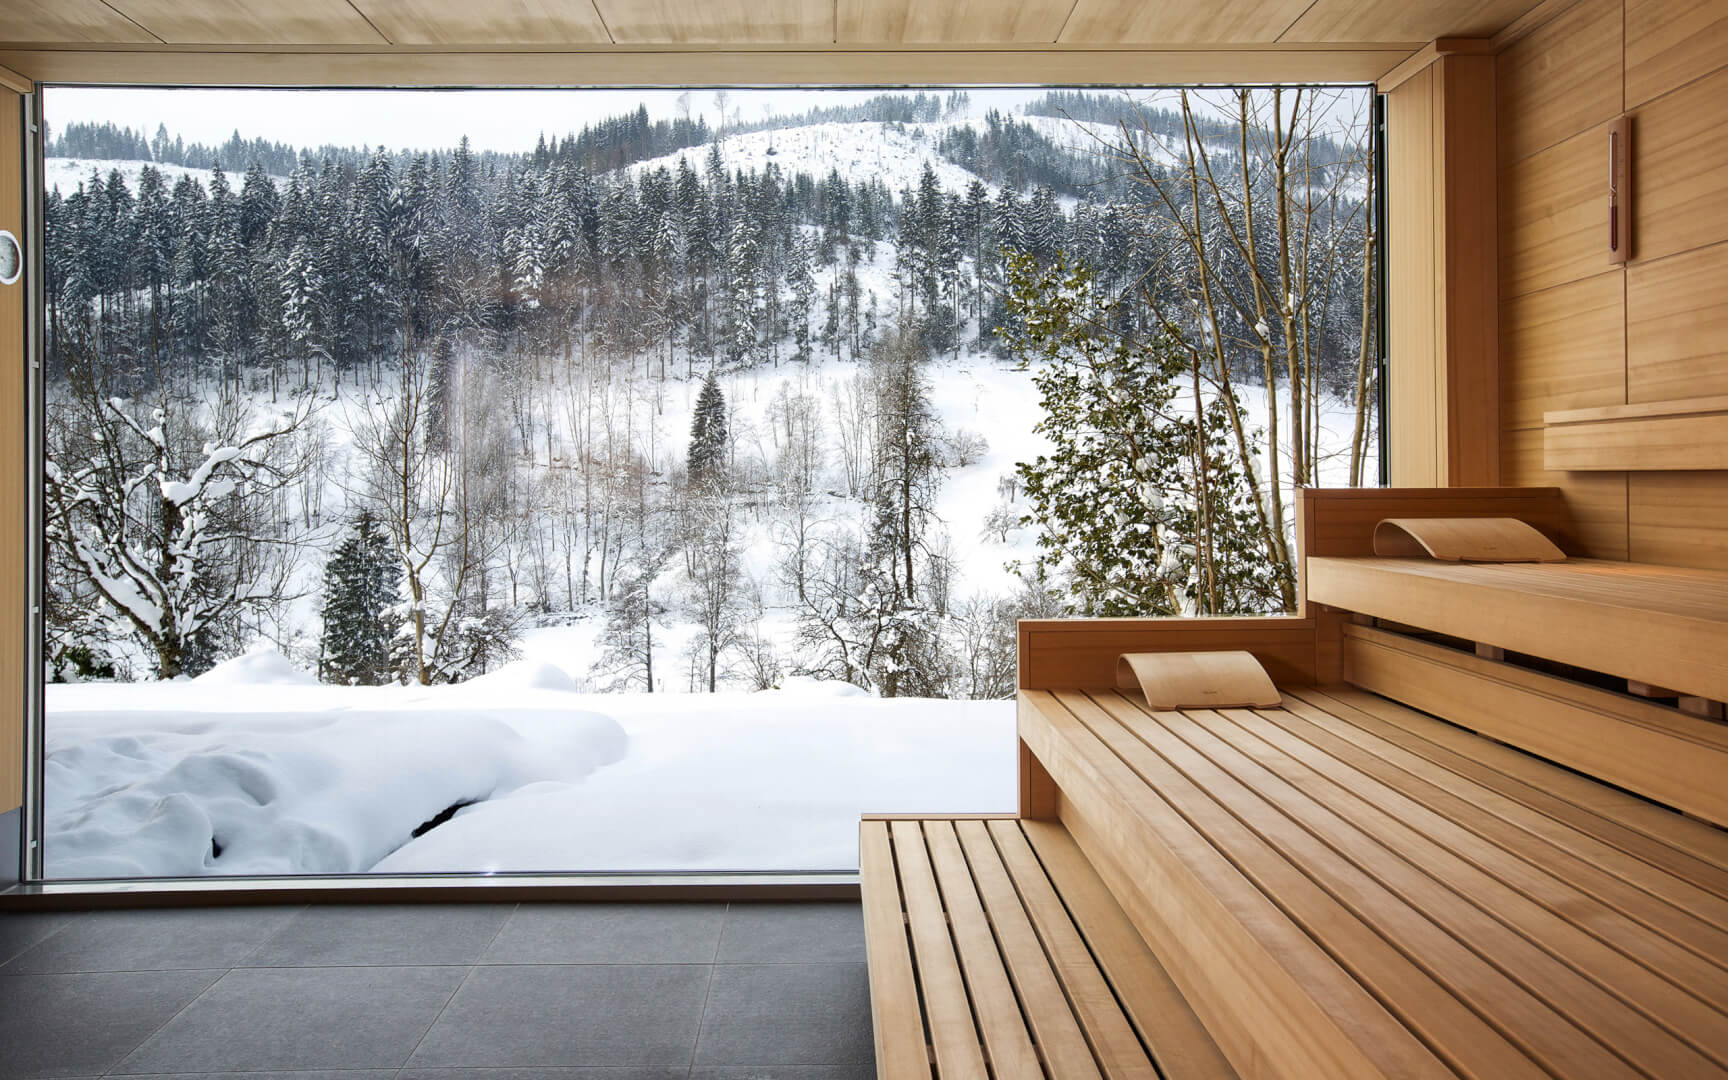 Learn about sauna use in winter from Guncast Pools and Wellness & KLAFS